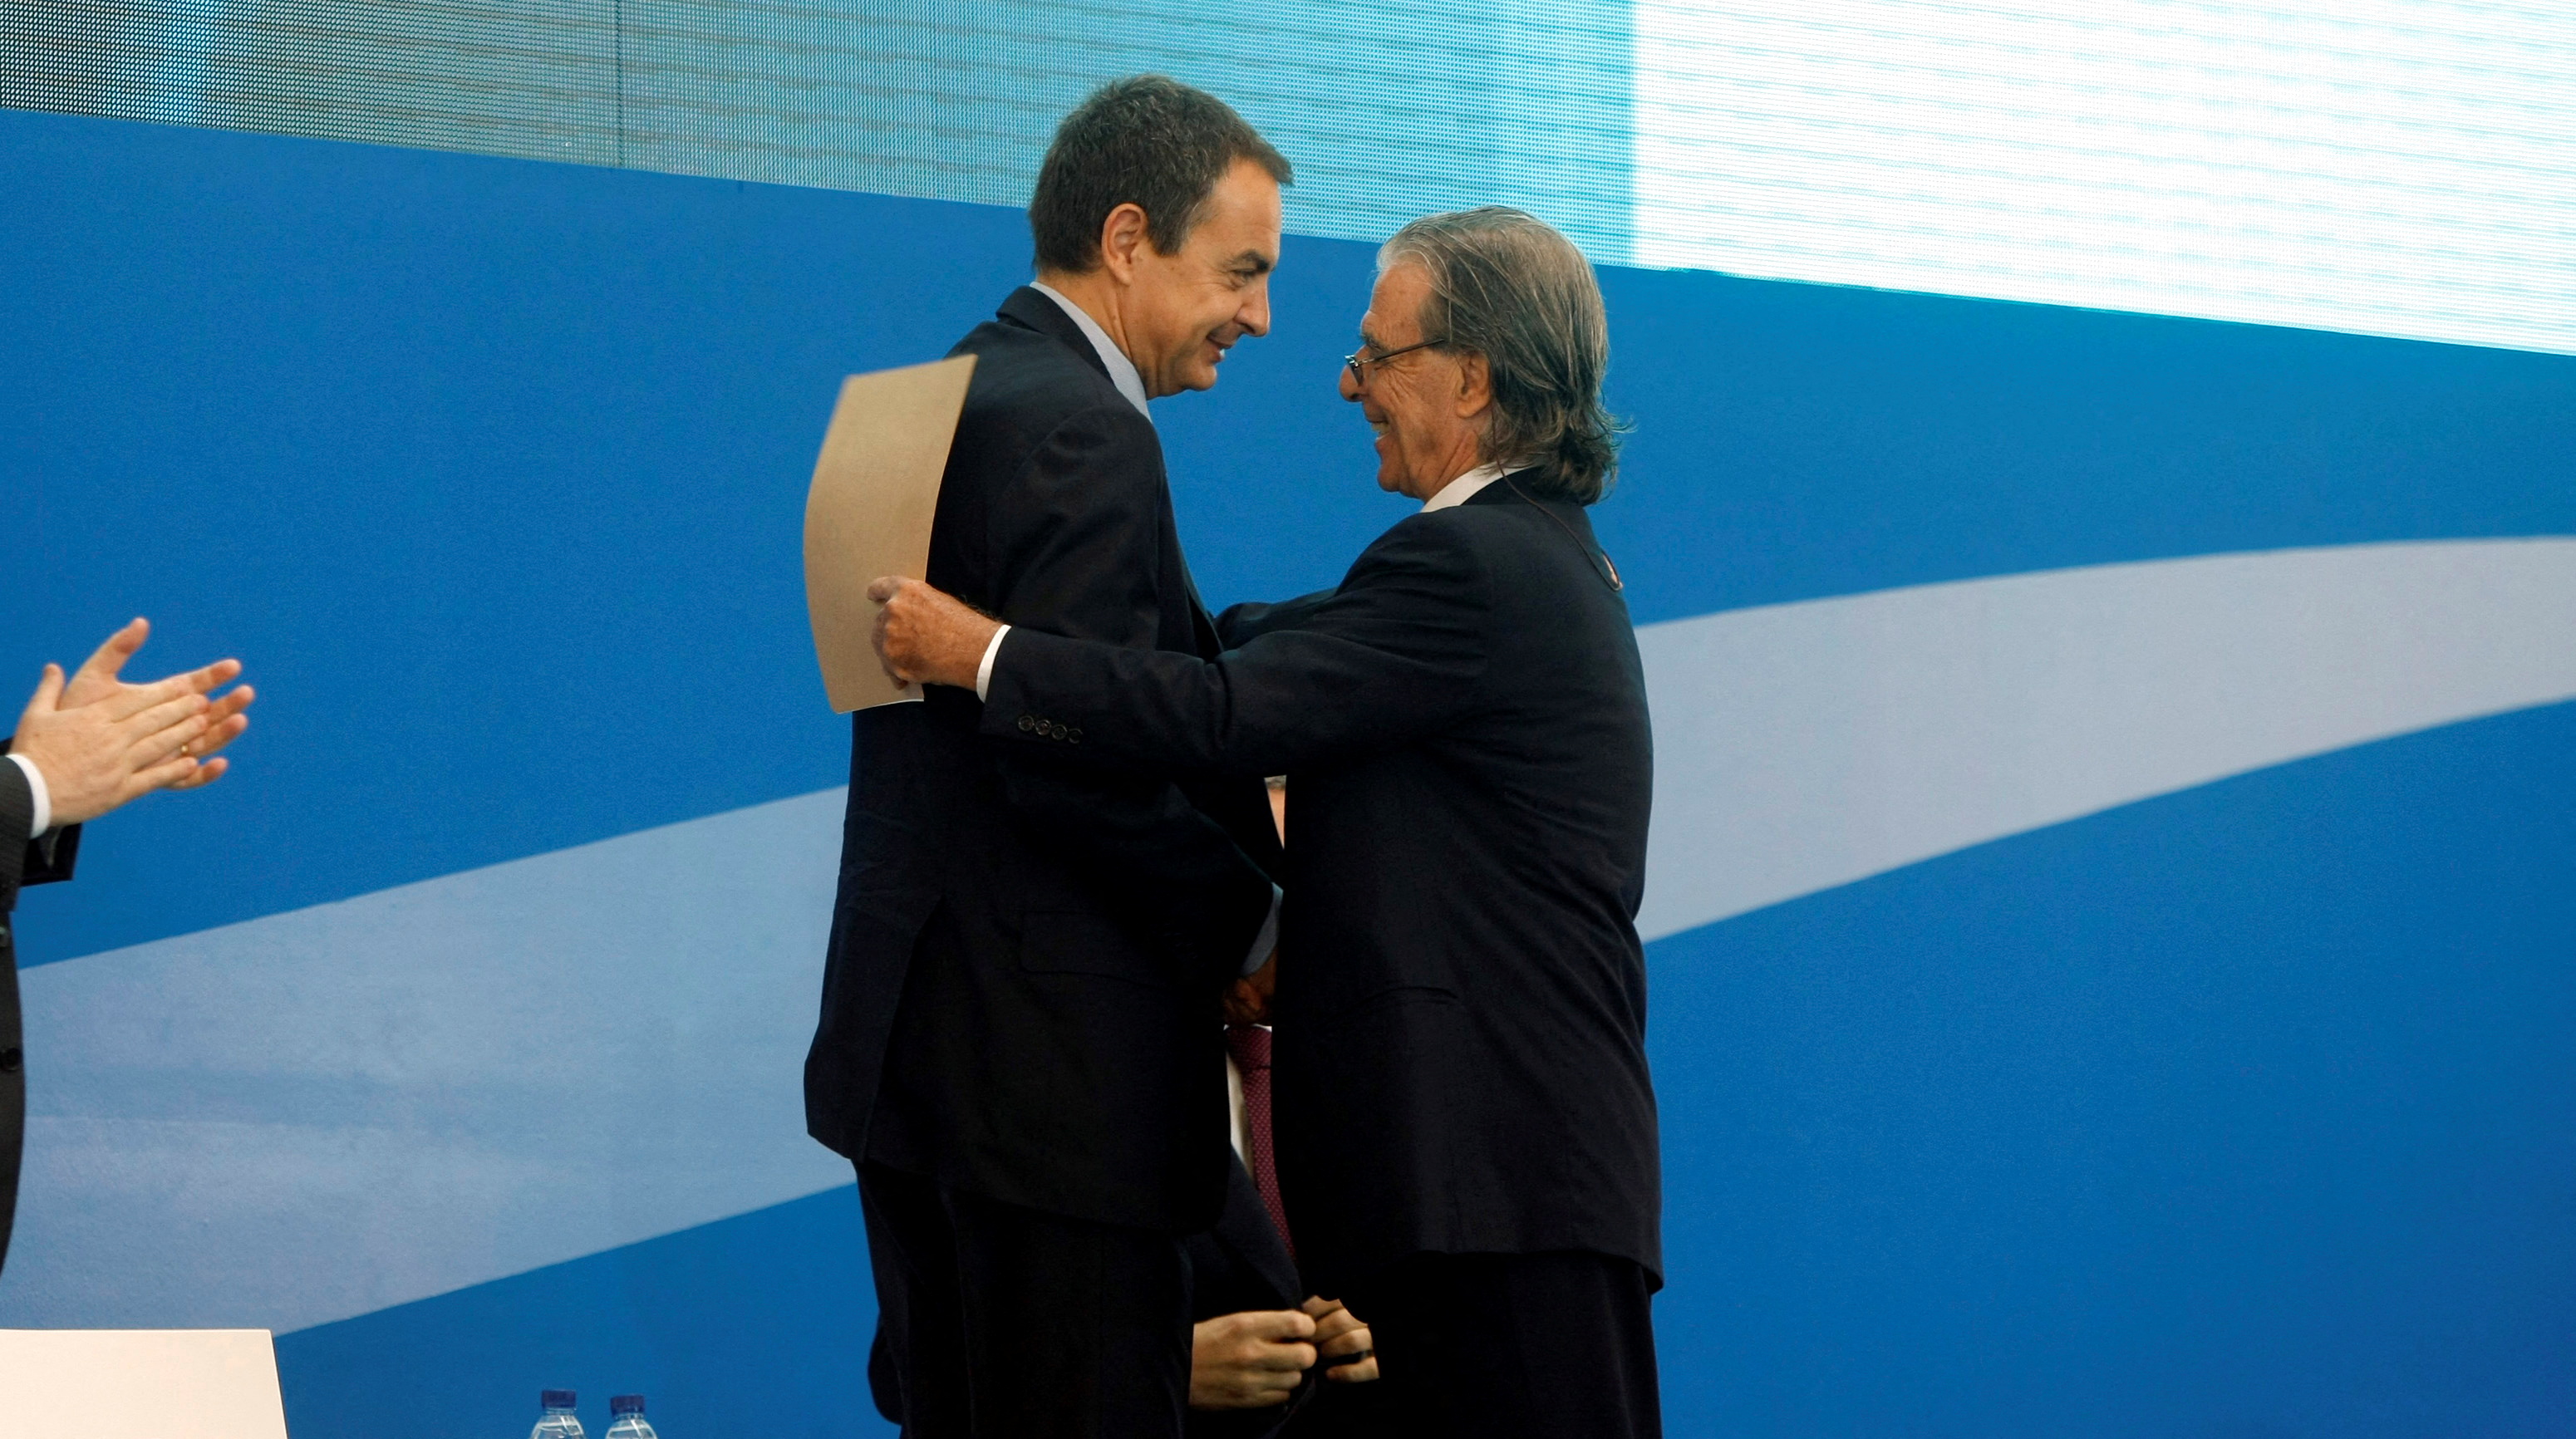 Spain's Prime Minister Zapatero embraces architect Ricardo Bofill during the inauguration of the T-1 terminal at Barcelona's El Prat airport